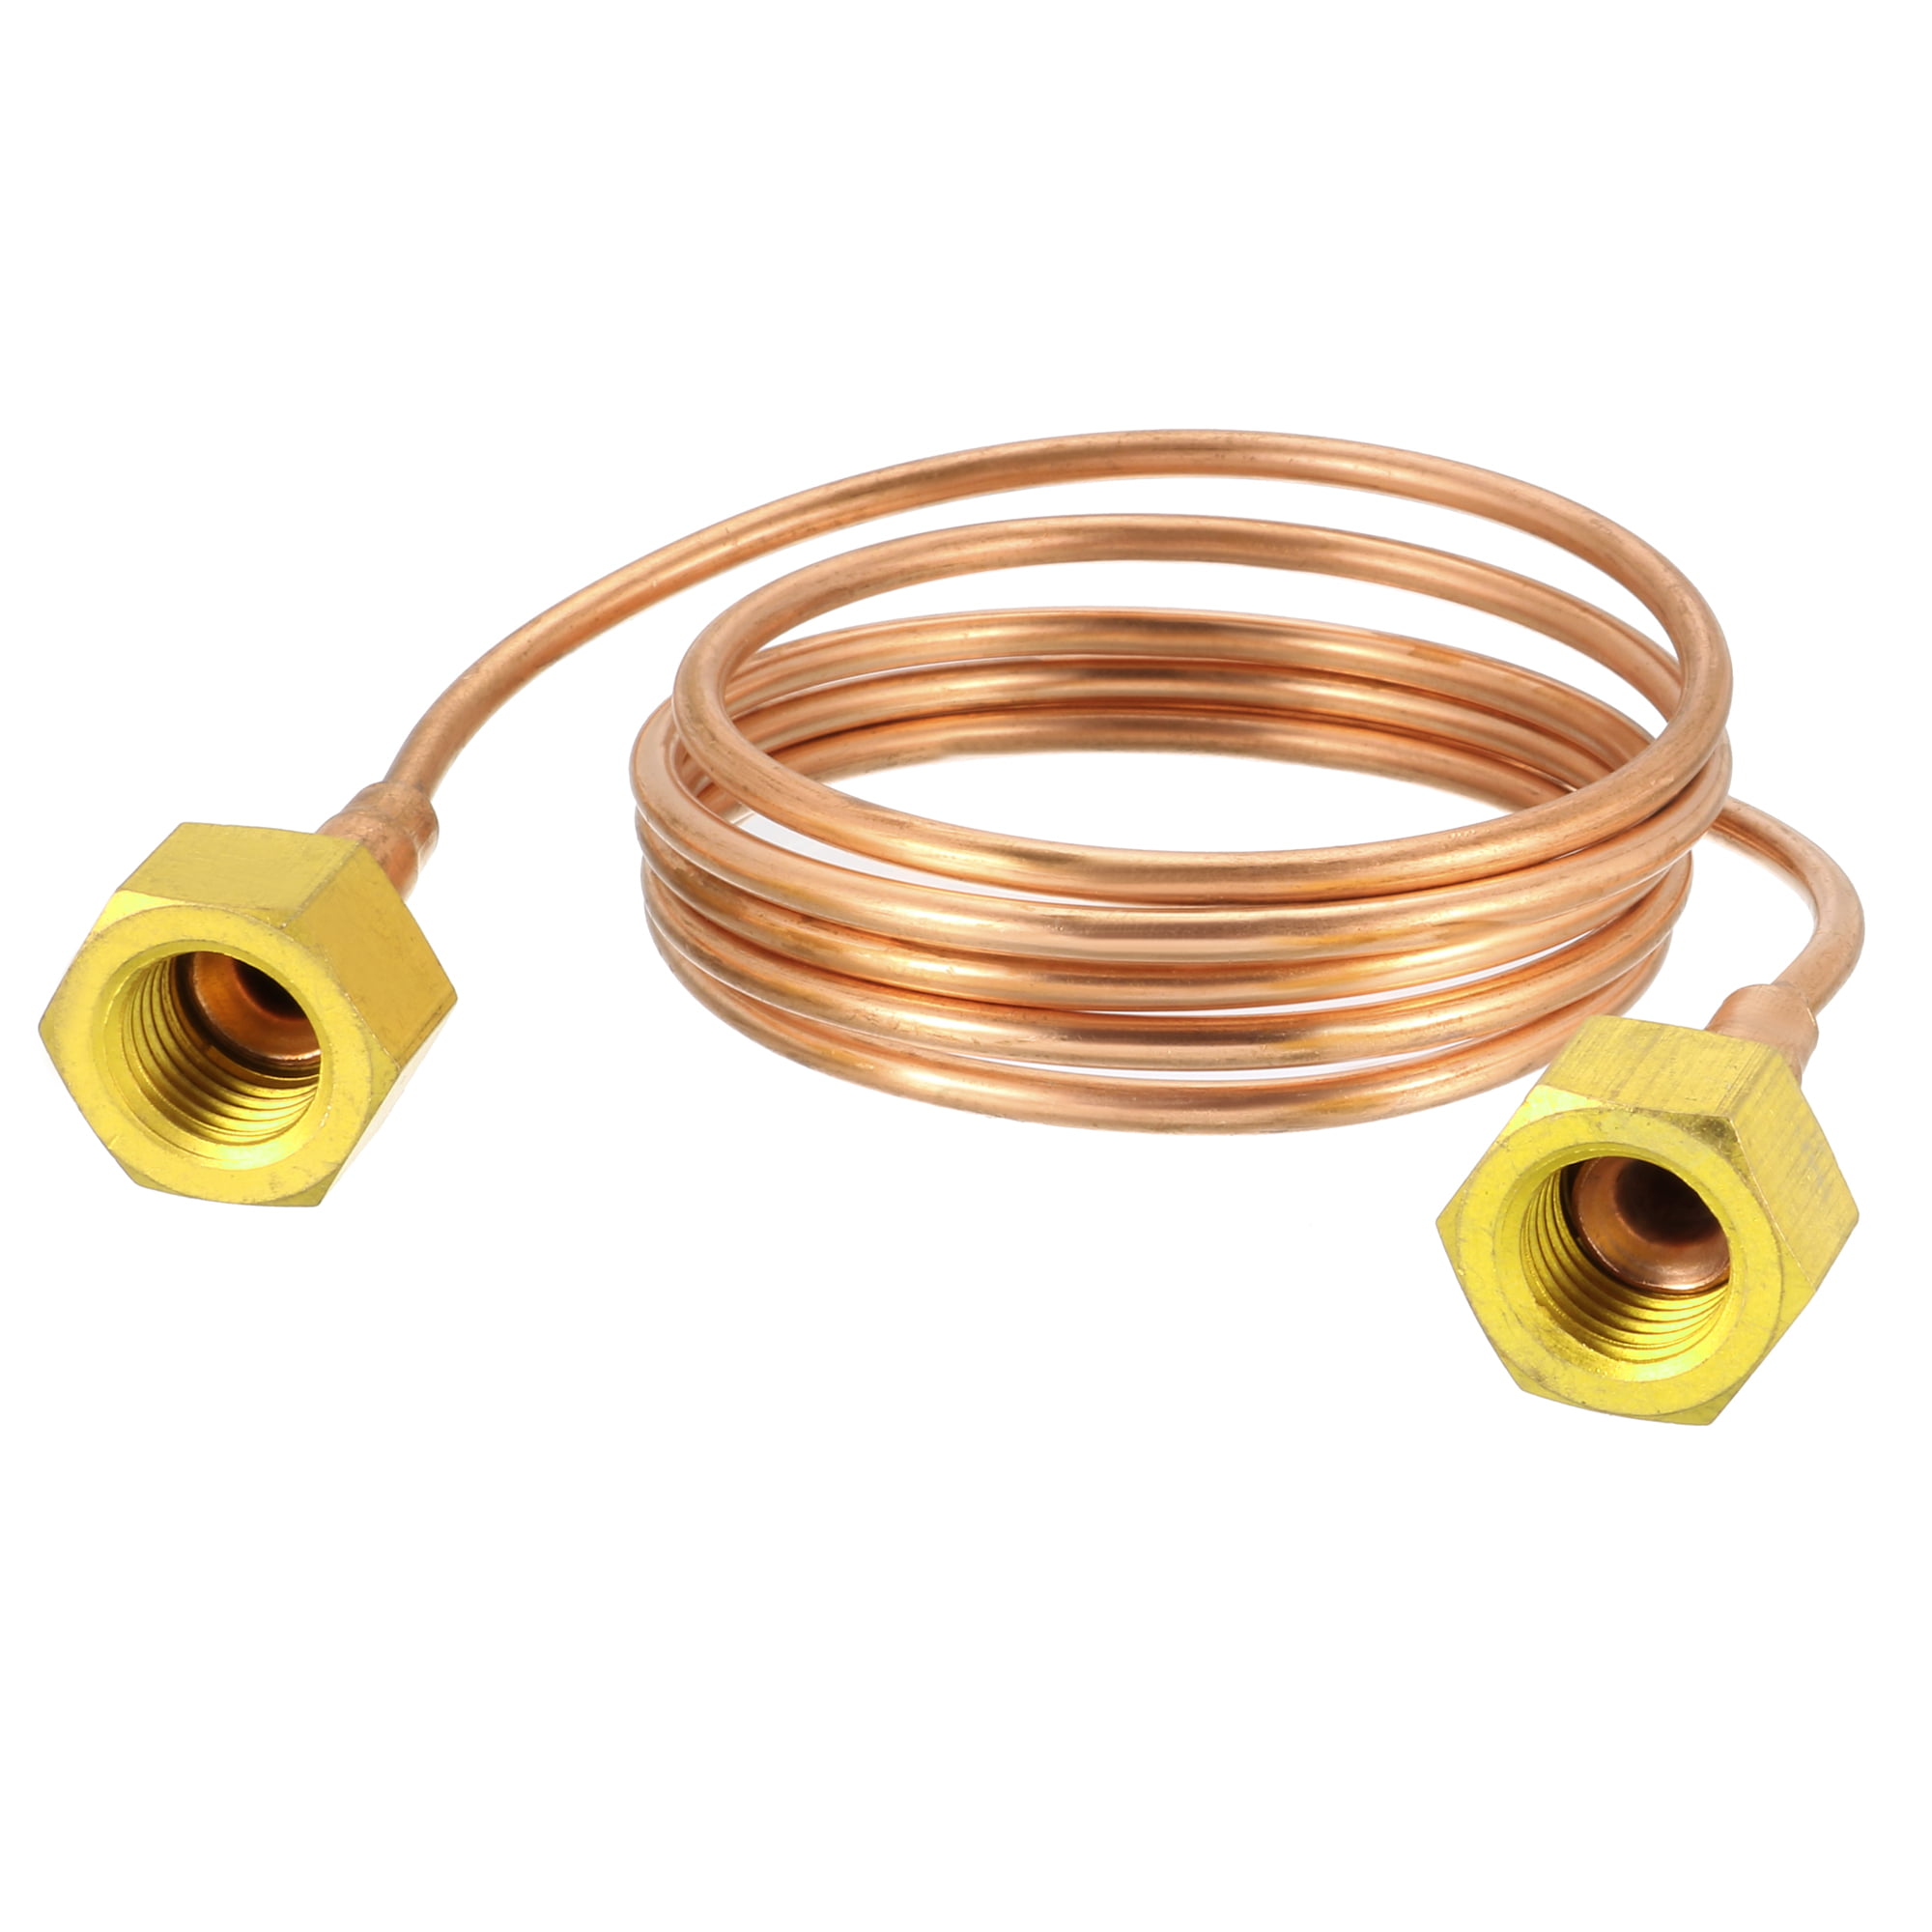 Details about   1M Soft Microbore Copper Tube Pipe OD 2~8mm ID 1~6mm For Refrigeration Plumbing 